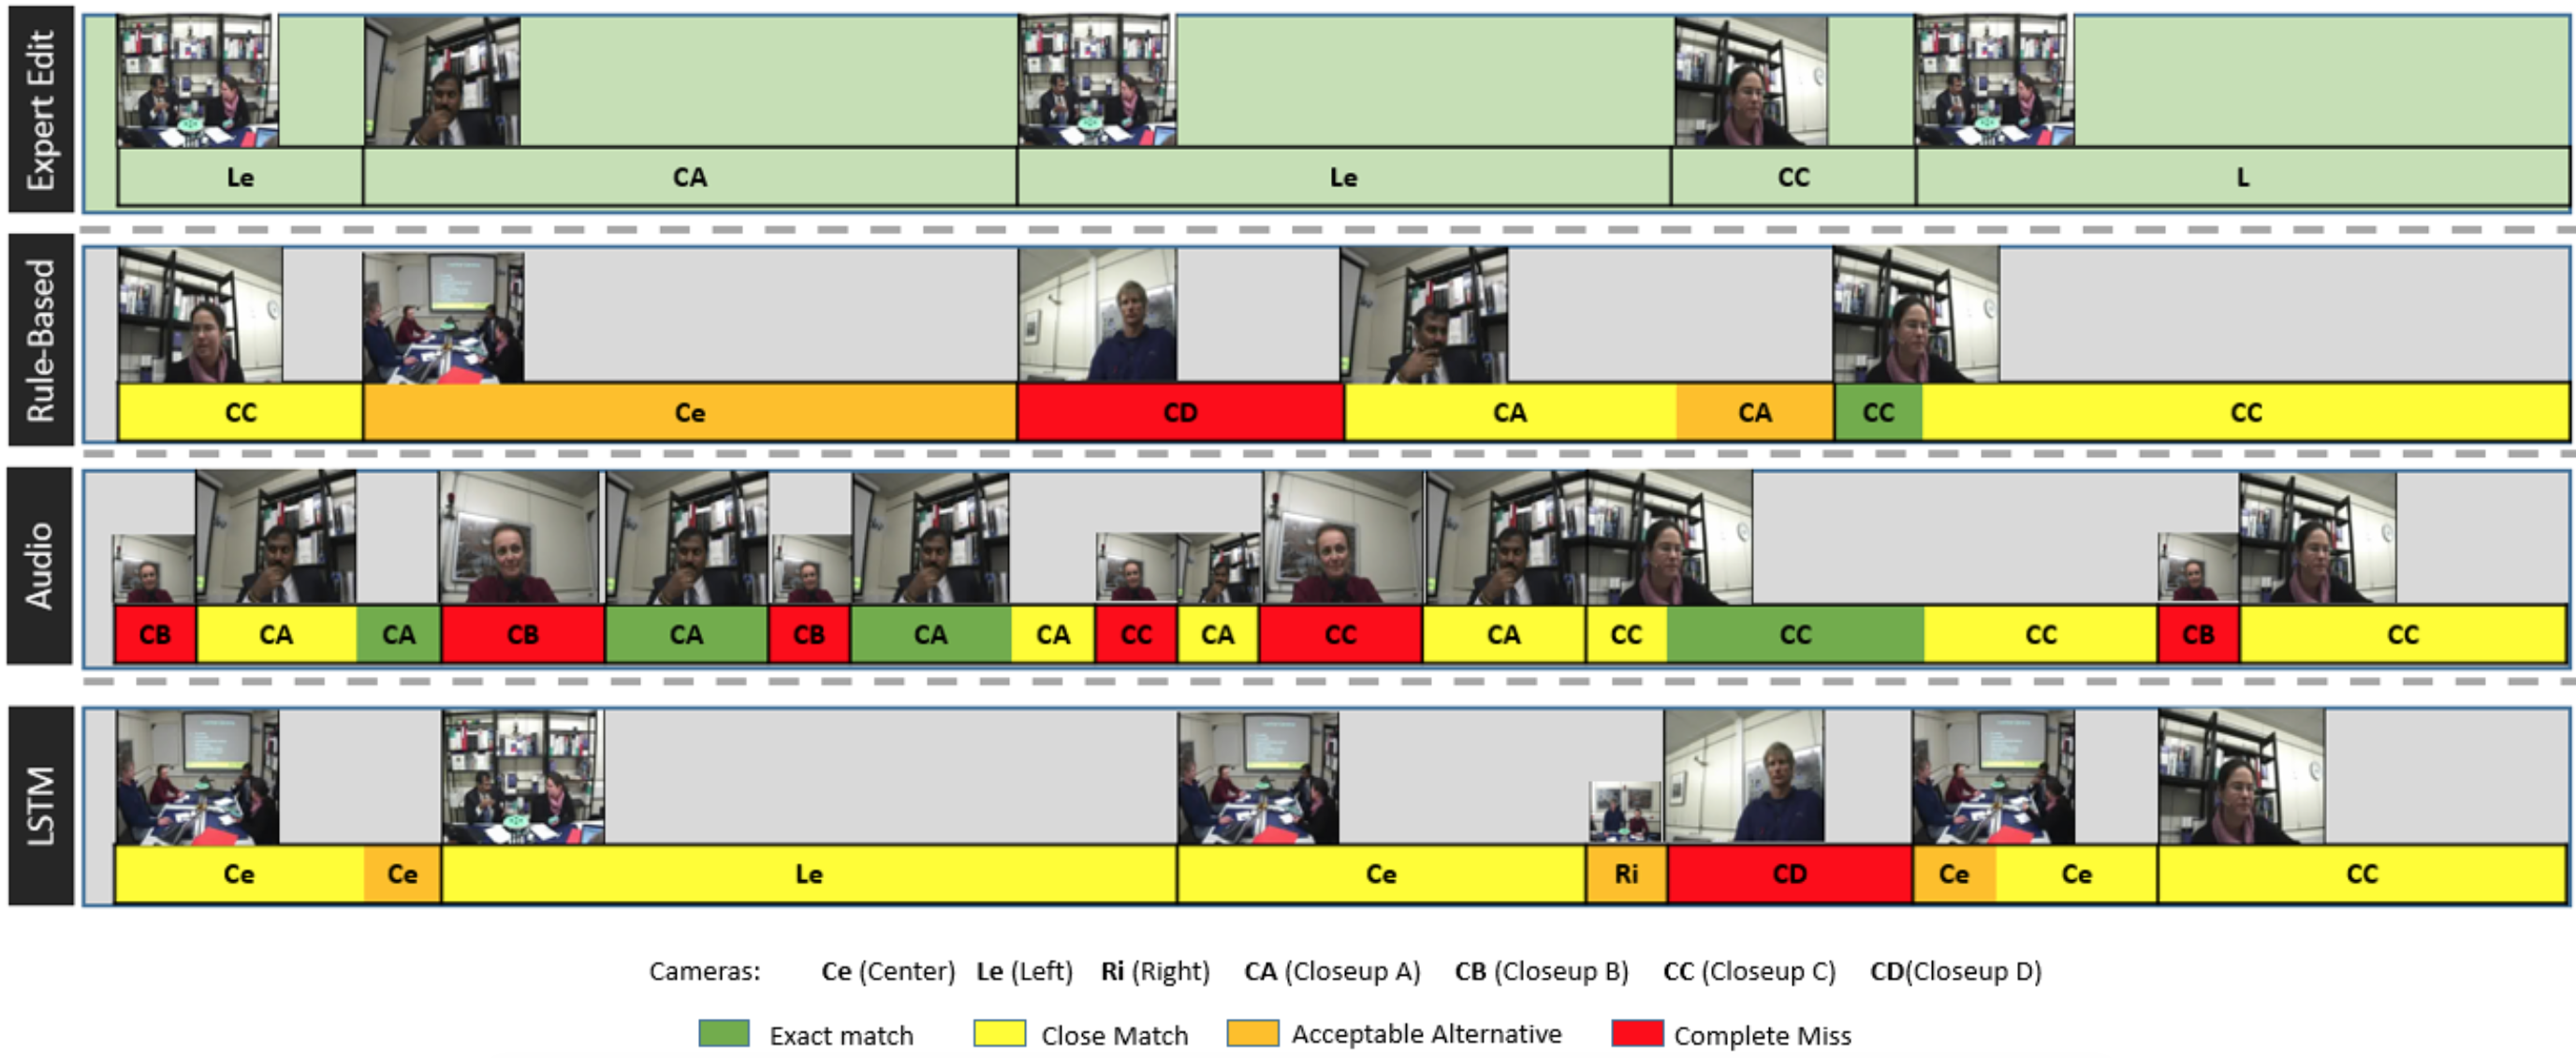 Here is a detailed analyses and comparison of a meeting clip. The colored timelines show how the three methods–rule, audio, and LSTM-based edits–compare to the human expert edit in terms of camera selection. The shortest shot is 1 second. The rule-based edit has smoother pacing. The audio-based edit is jittery, and makes multiple complete misses. The LSTM-based makes mostly close matches (Screen captures from the University of Edinburgh AMI corpus are reused under the Creative Commons license CC BY 4.0)